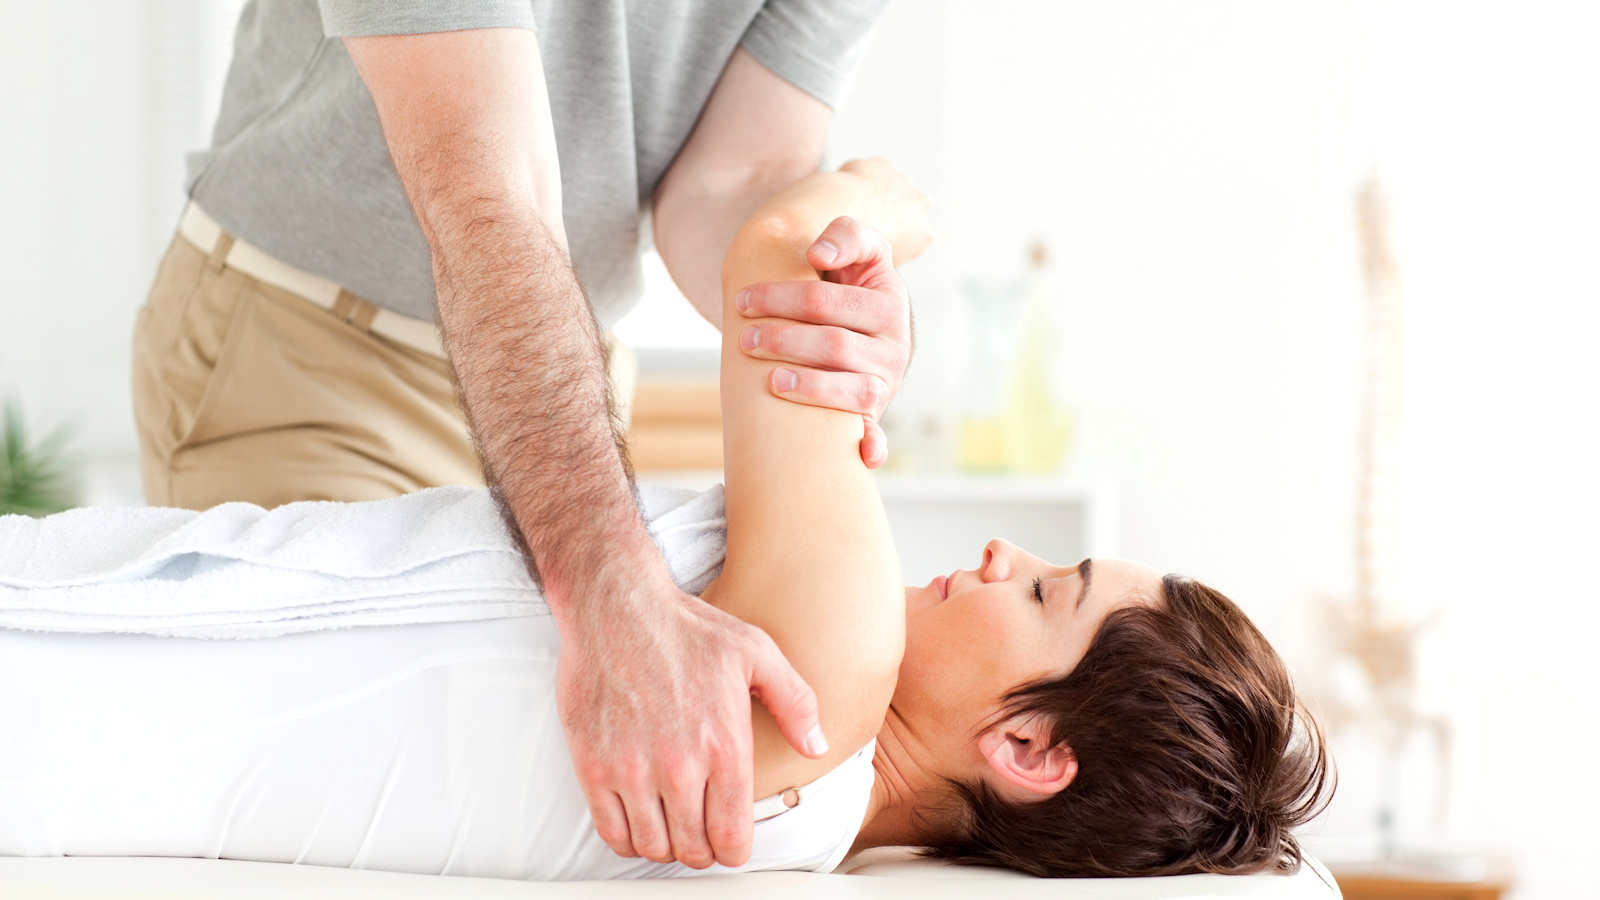 Rethwill Chiropractic Clinic of Eugene